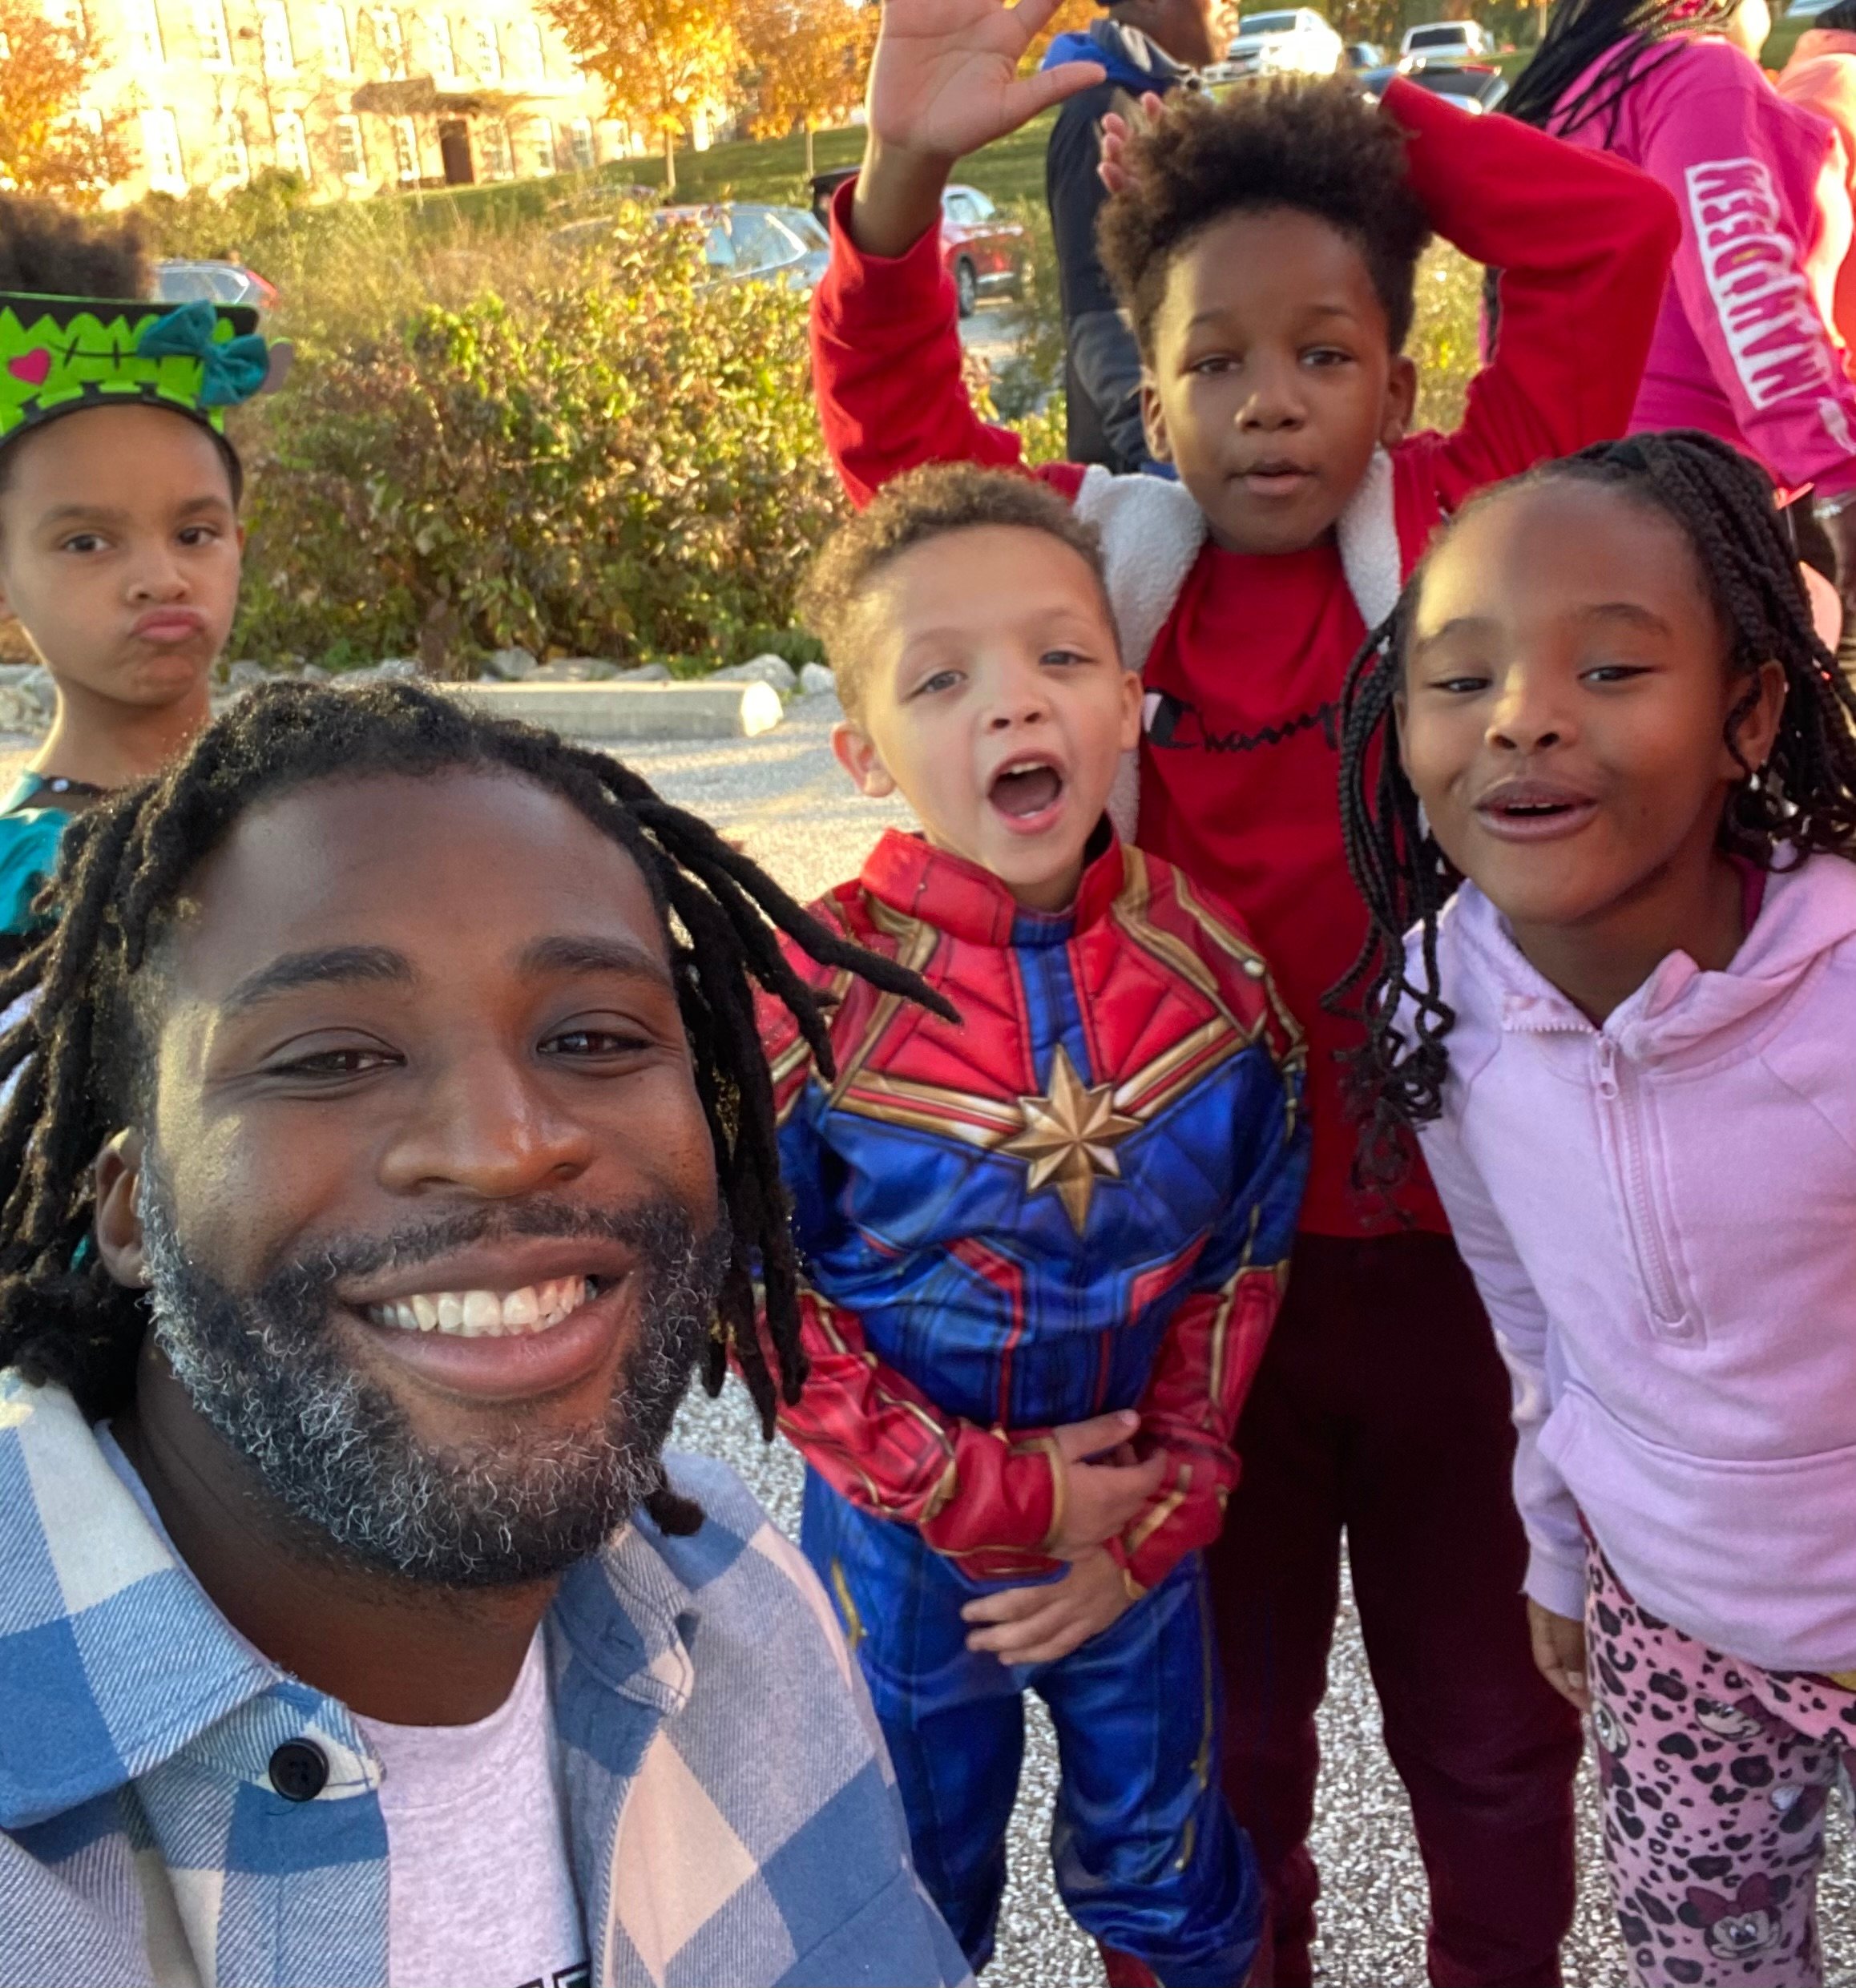 On the Job: The Intergenerational School’s Principal Dr. Mario Clopton-Zymler highlights challenges (and many) successes during his first year leading TIS